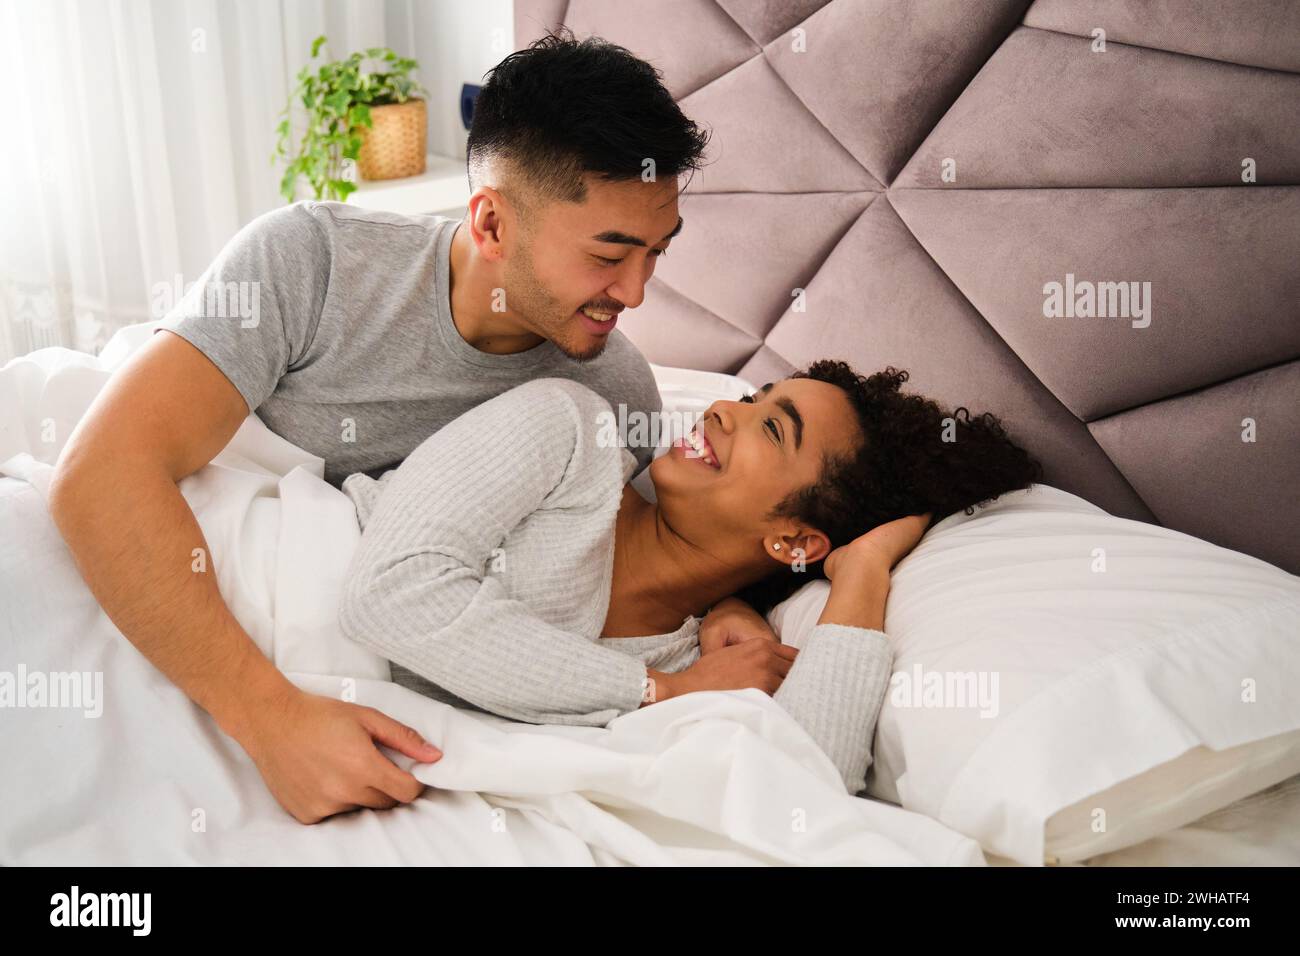 Multiethnic romantic couple wake up together in bed during honeymoon. Stock Photo